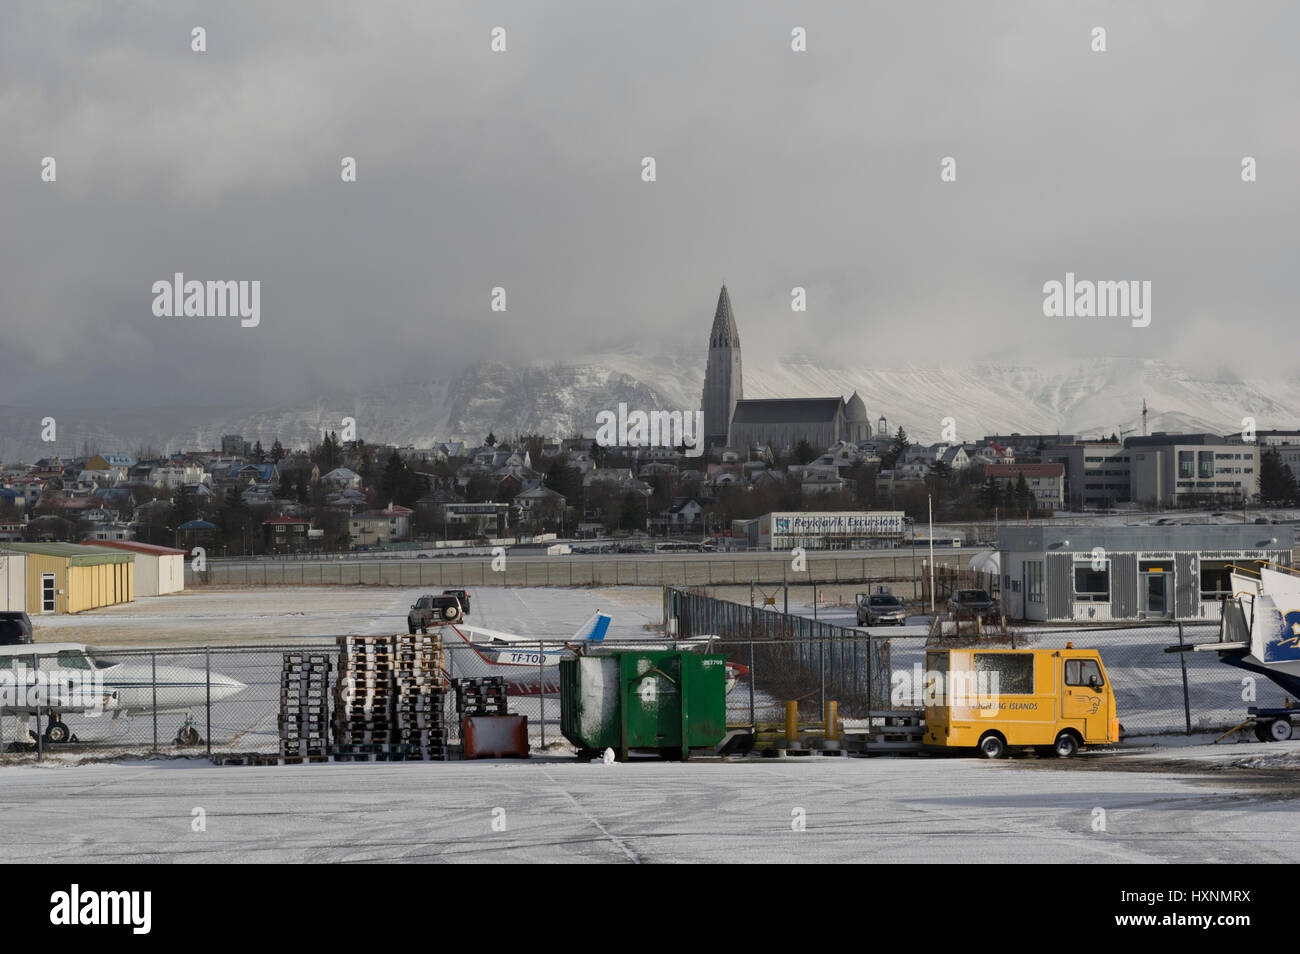 Hallgrímskirkja Church in Reykjavik Iceland seen in the distance from the airport Stock Photo